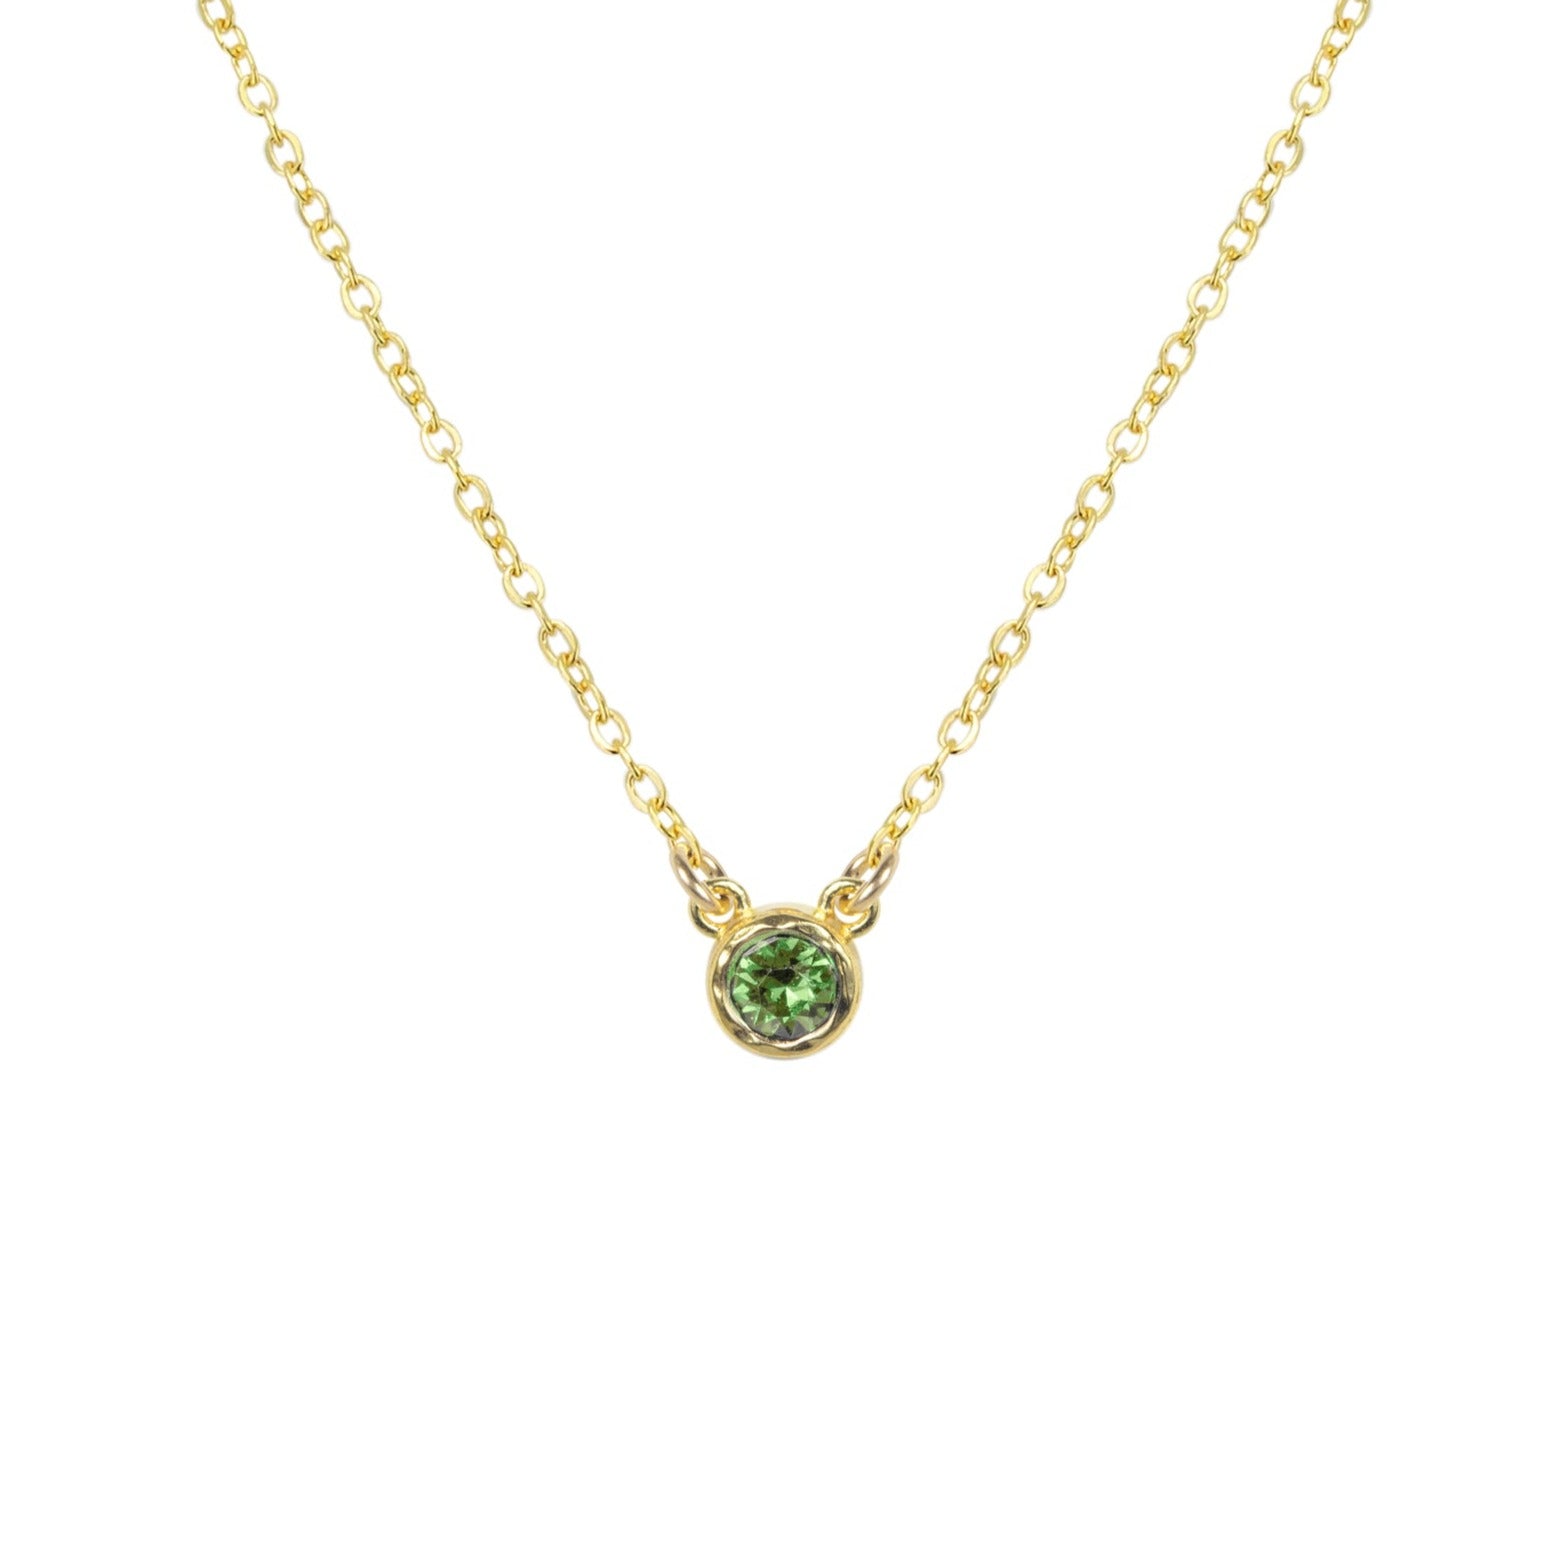 August Gold Birthstone Necklace by Katie Dean Jewelry, made in America, perfect for the dainty minimal jewelry lovers